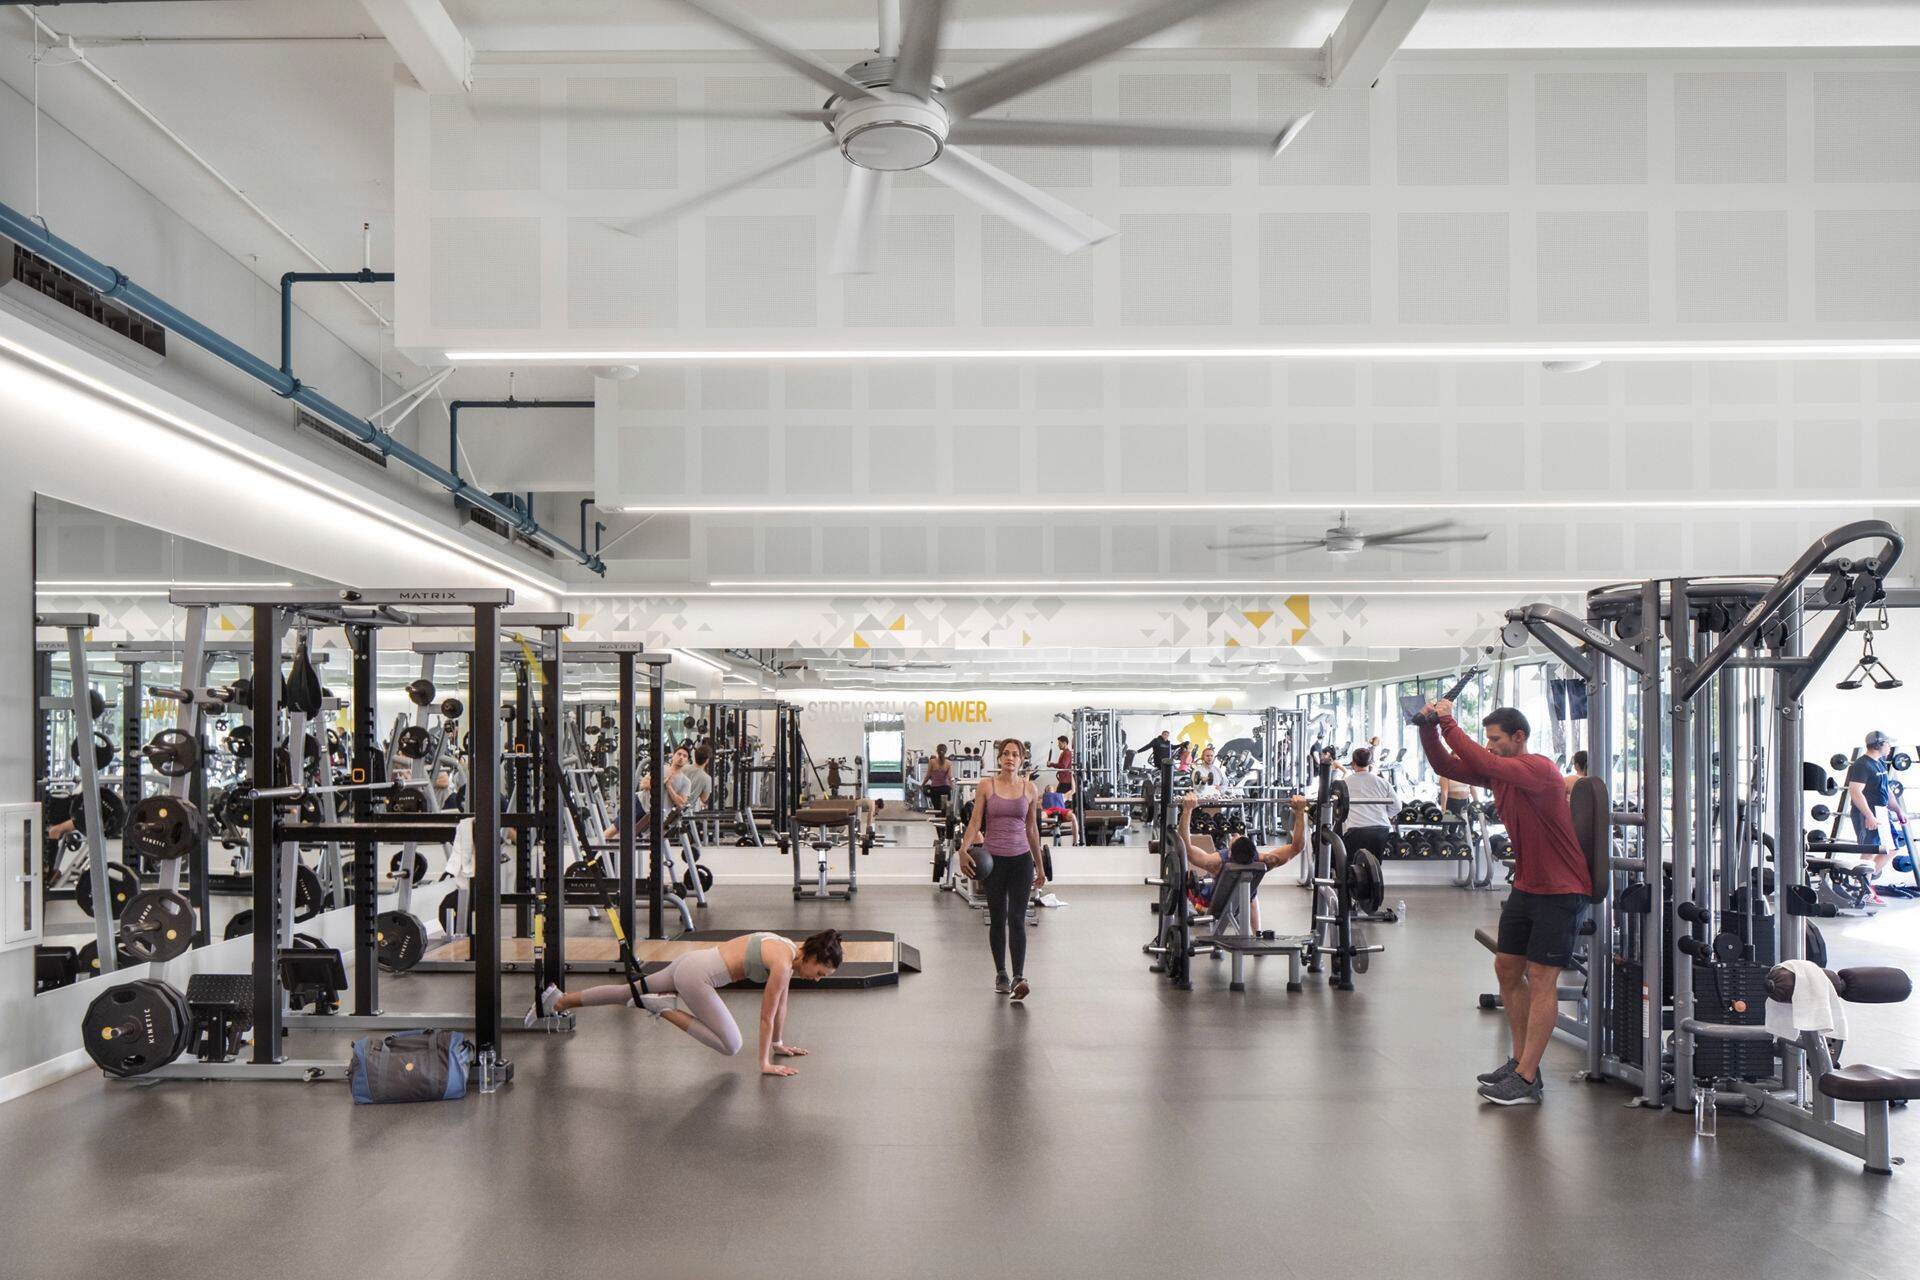 Lifestyle photography of the KINETIC™ fitness center located at 600 Newport Center Drive in Newport Beach, CA